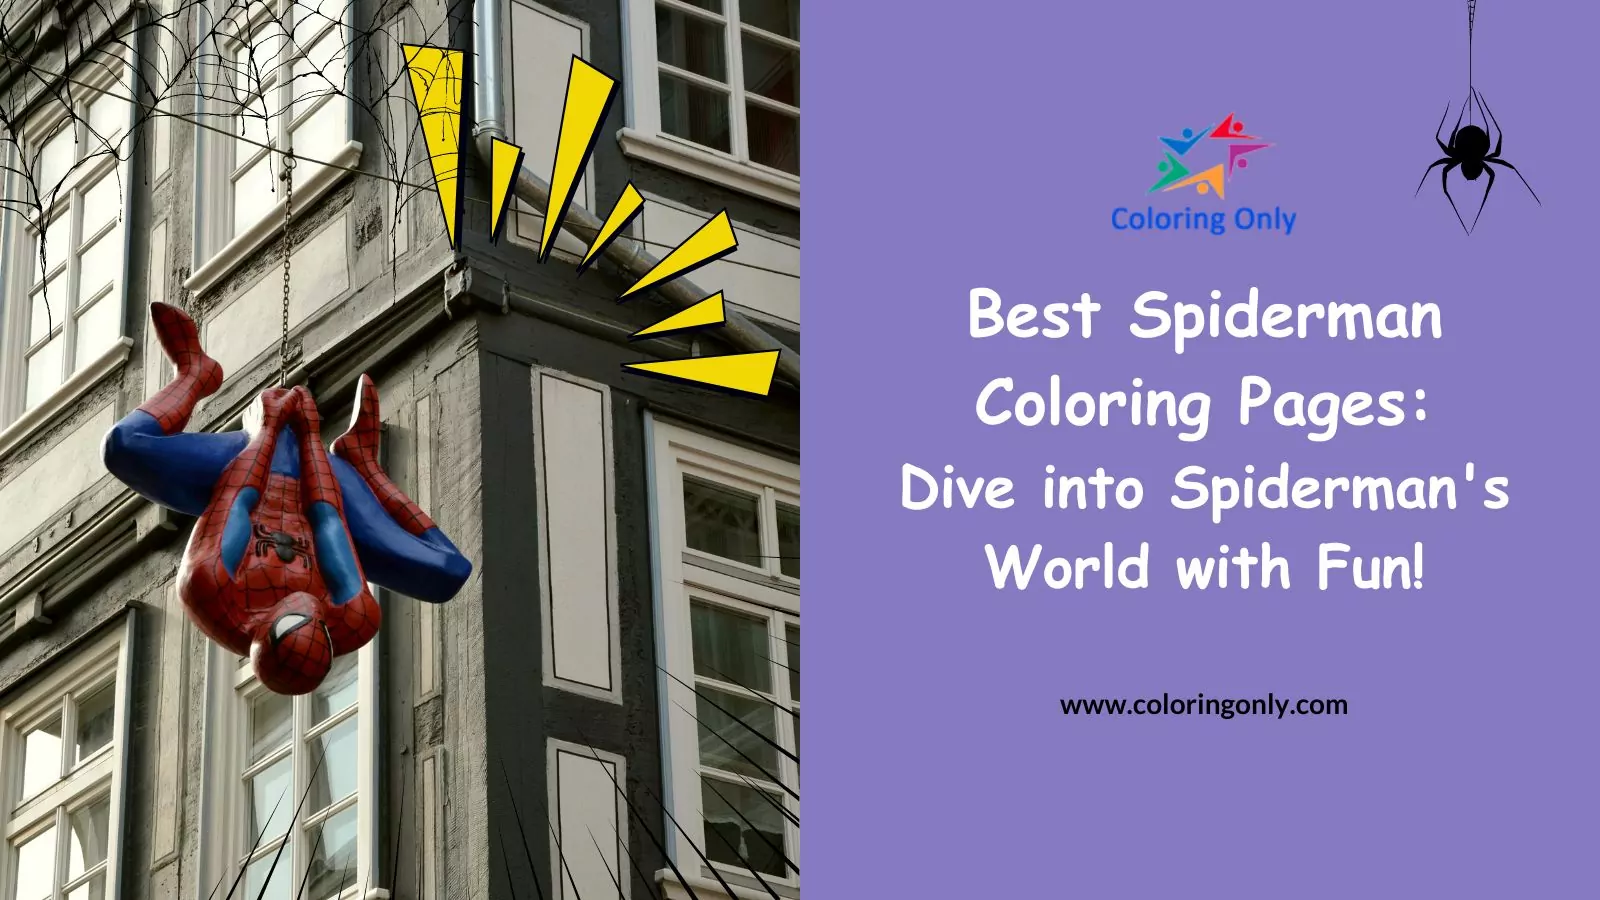 Best Spiderman Coloring Pages: Dive into Spiderman’s World with Fun!